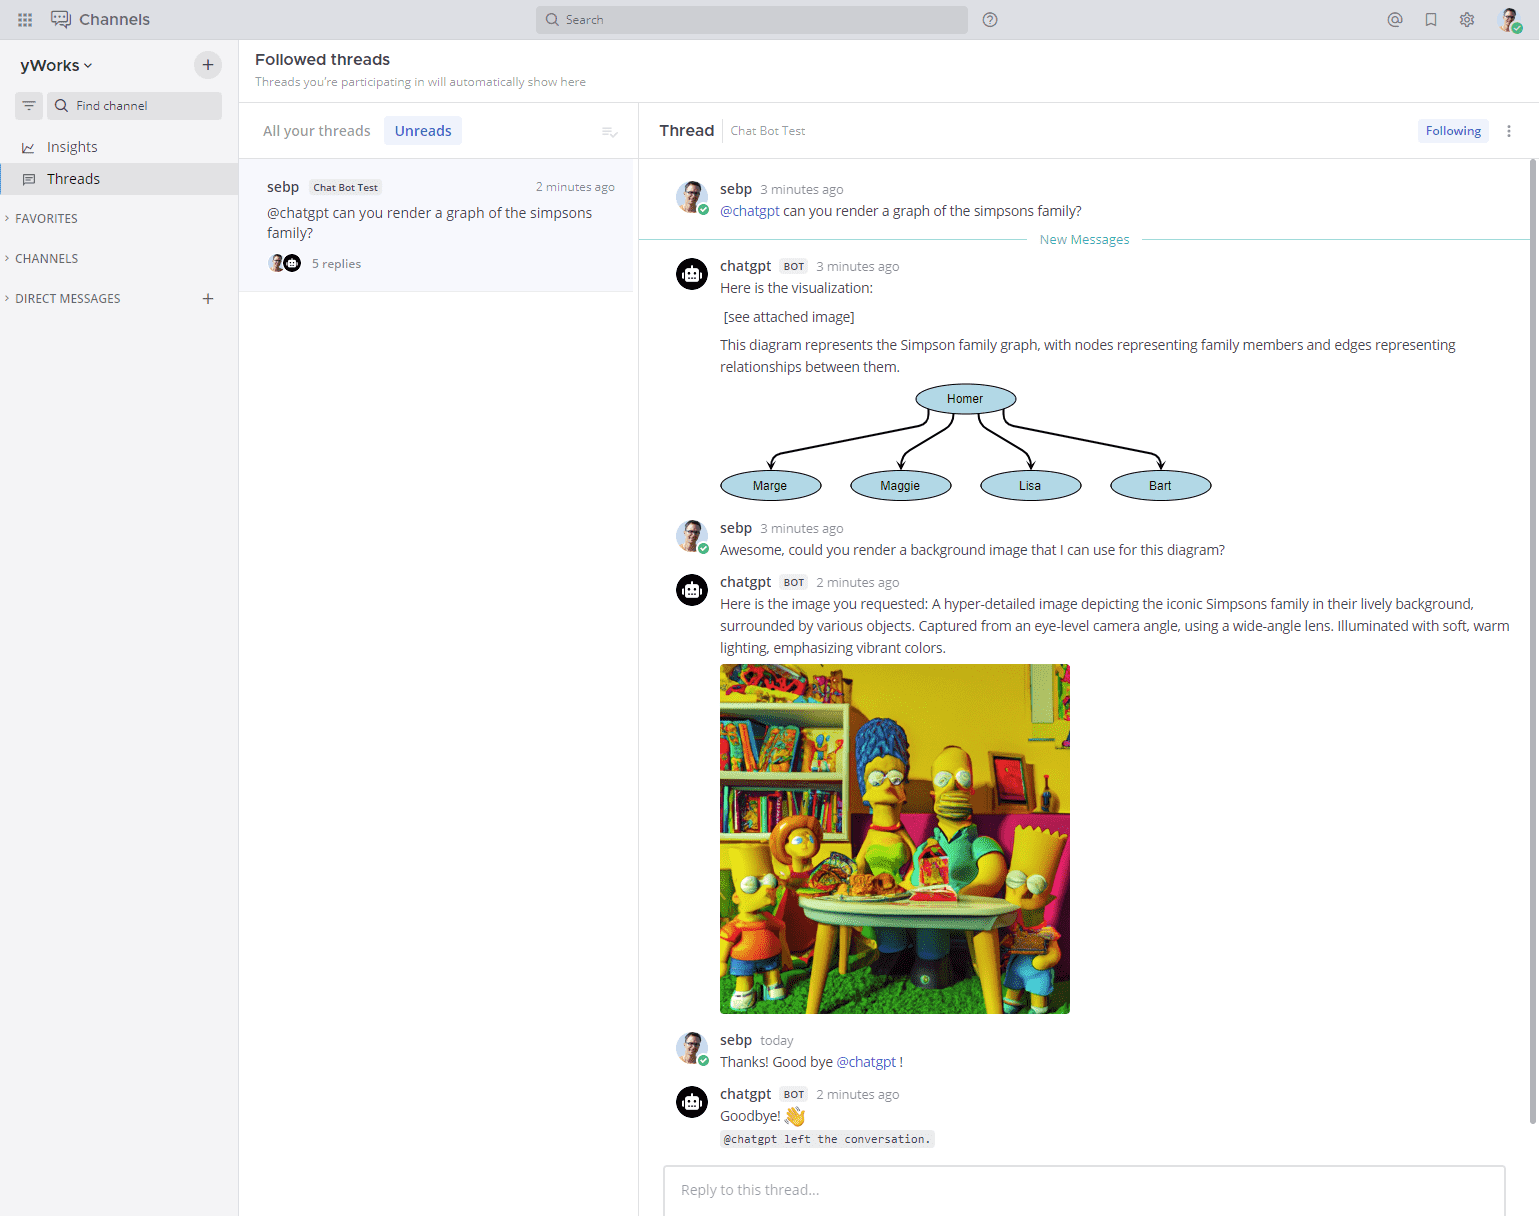 A chat window in Mattermost showing the chat between the OpenAI bot and "yGuy"